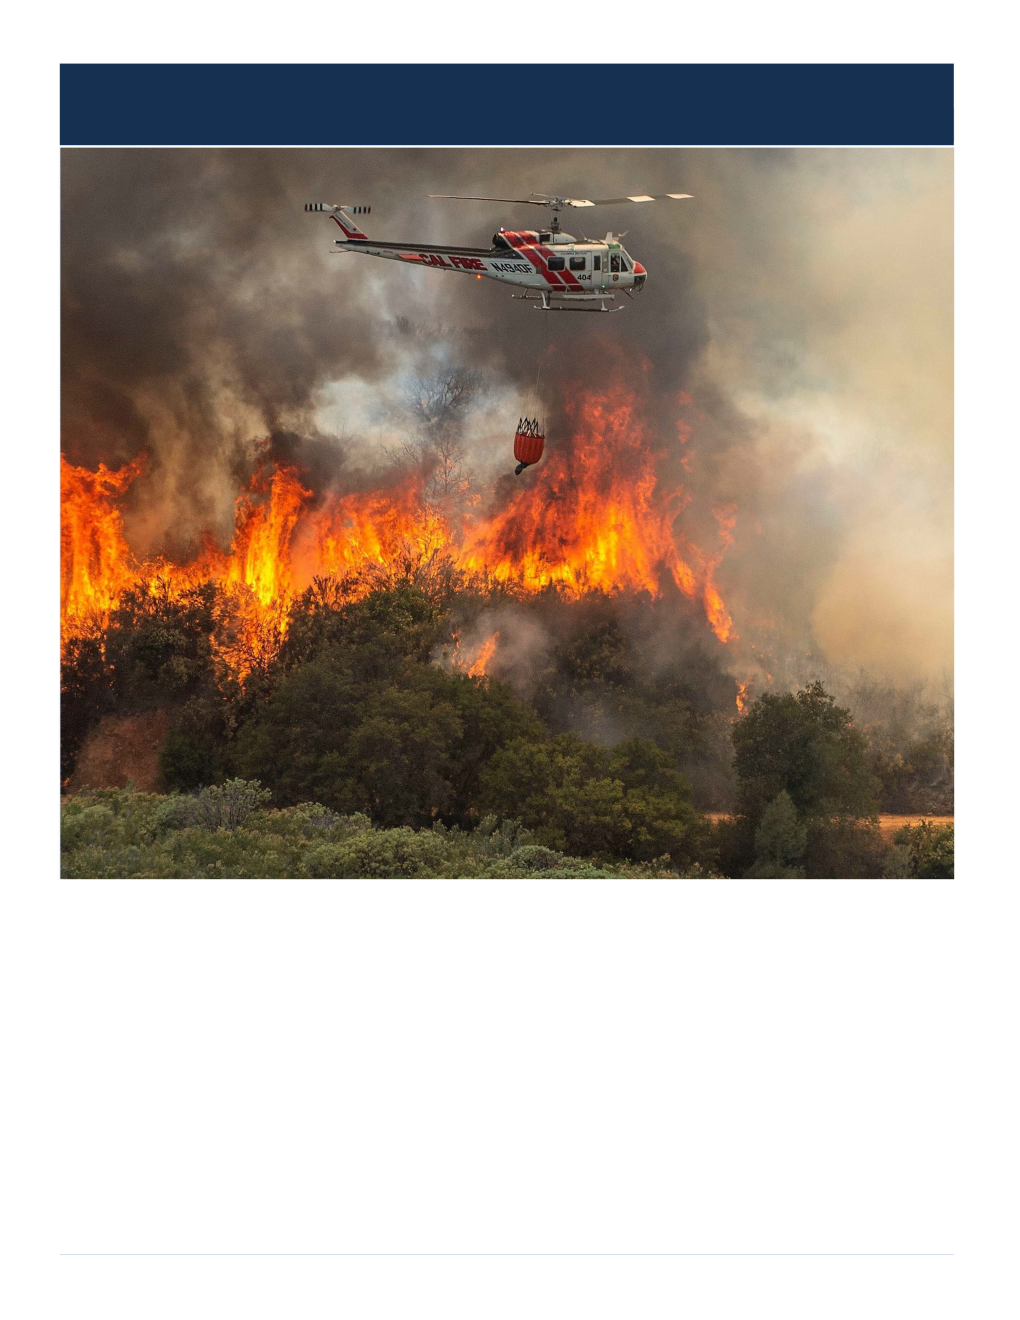 Report of Governor Newsom's Strike Force on Addressing Wildfire Risk